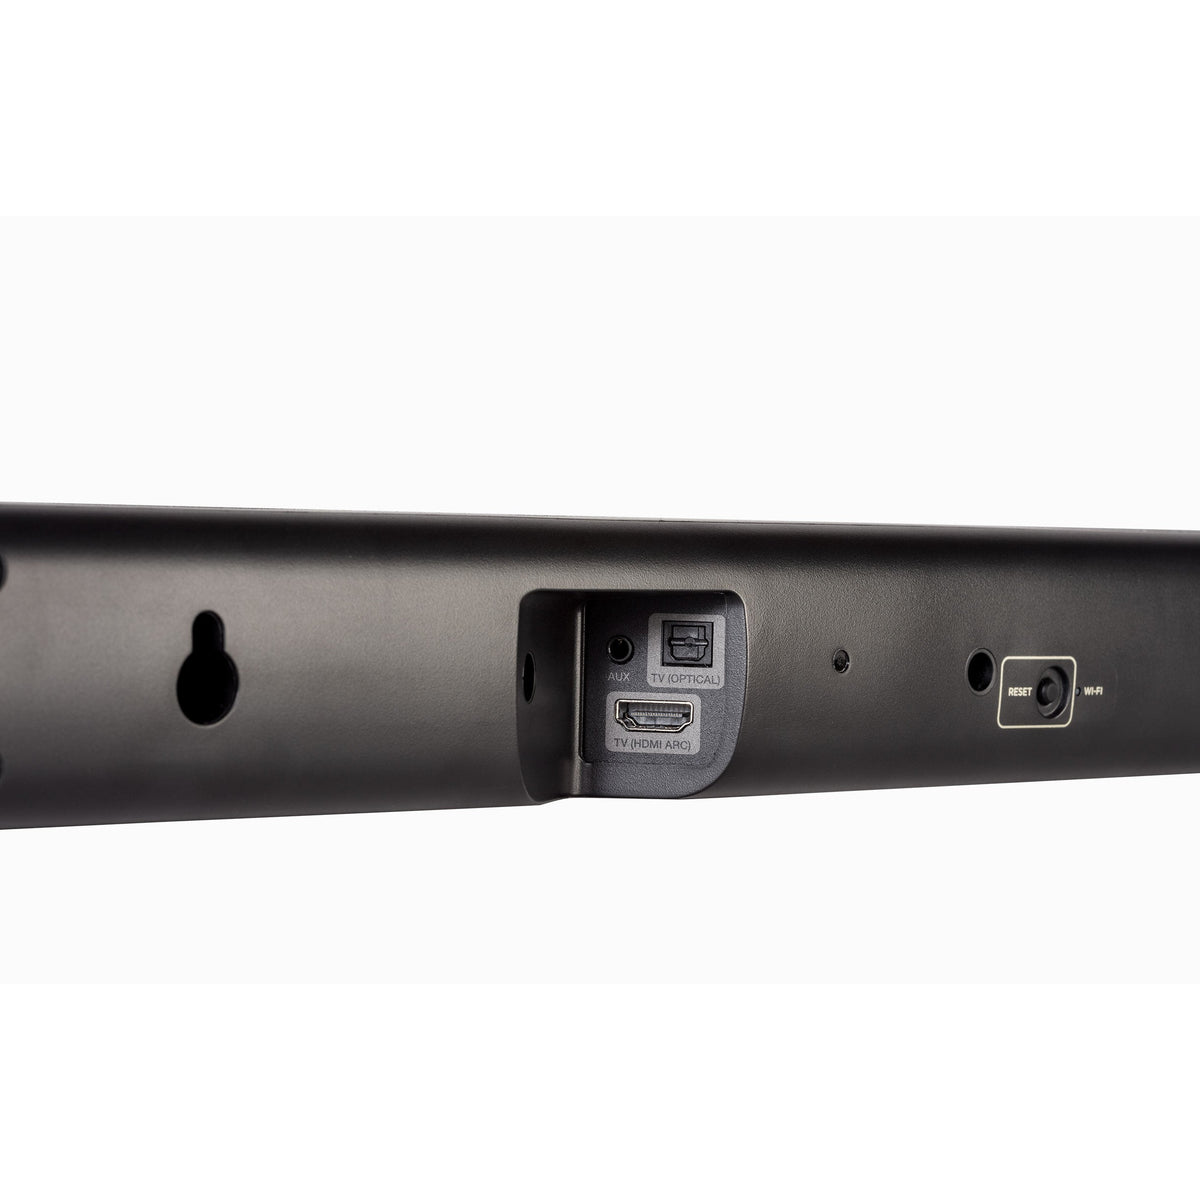 Denon DHT-S416 2.1Ch Sound Bar with Wireless Subwoofer - Black | DHTS416BKE2GB from Denon - DID Electrical